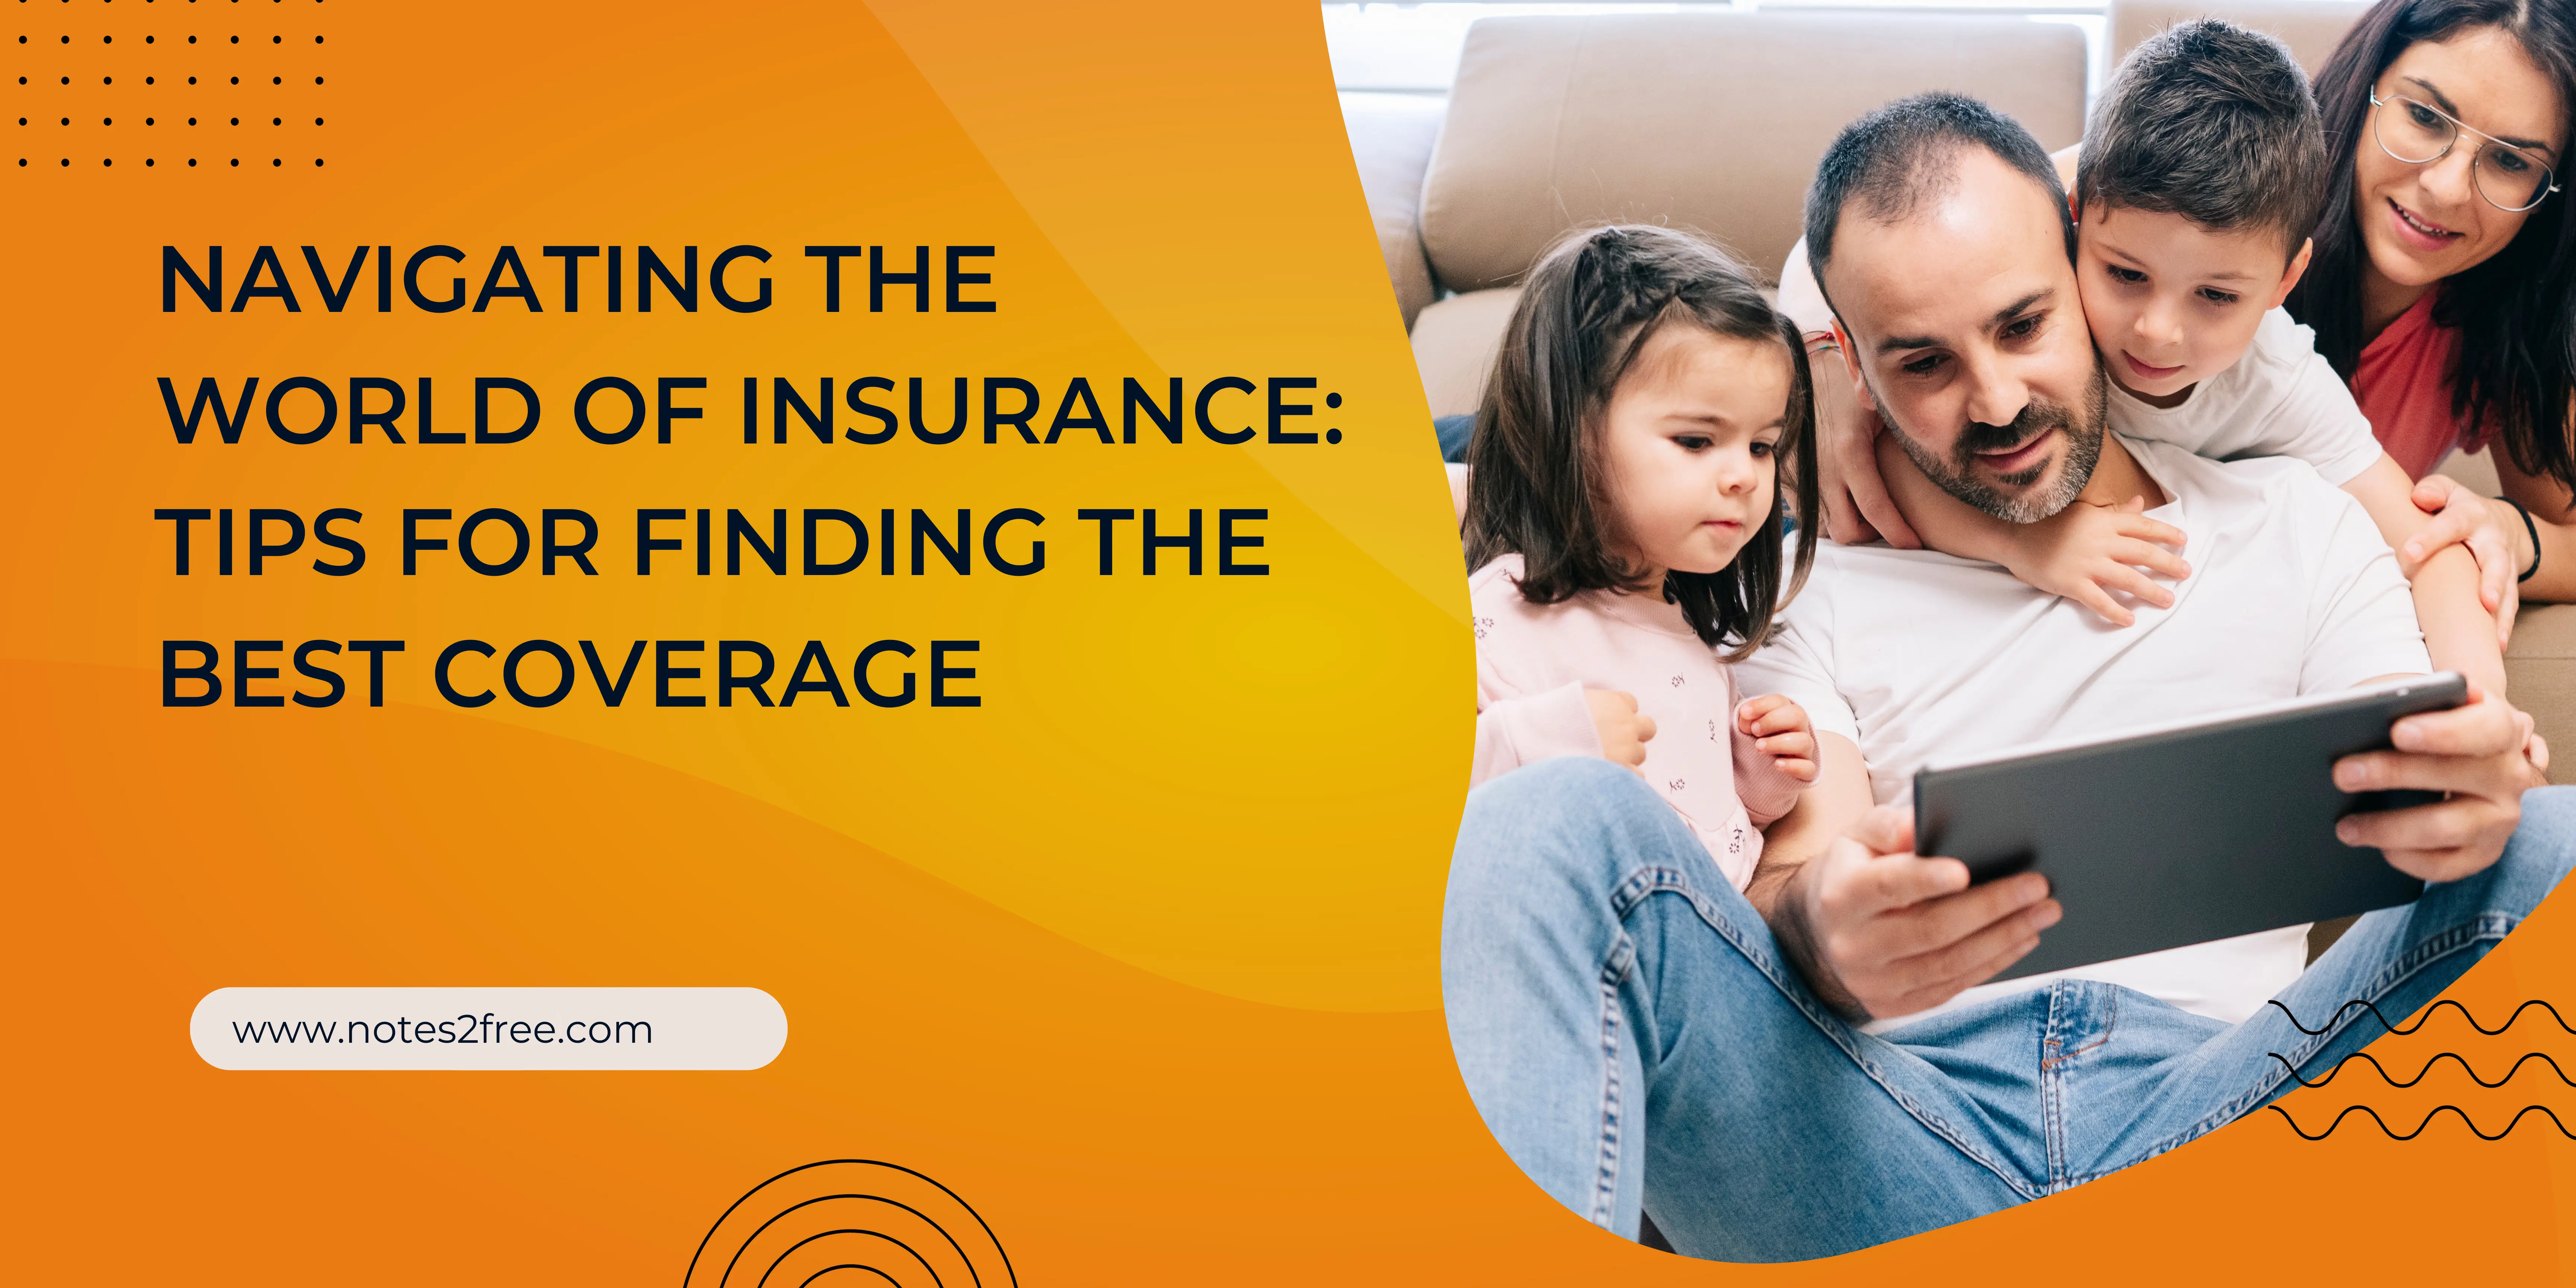 Navigating the World of Insurance: Tips for Finding the Best Coverage